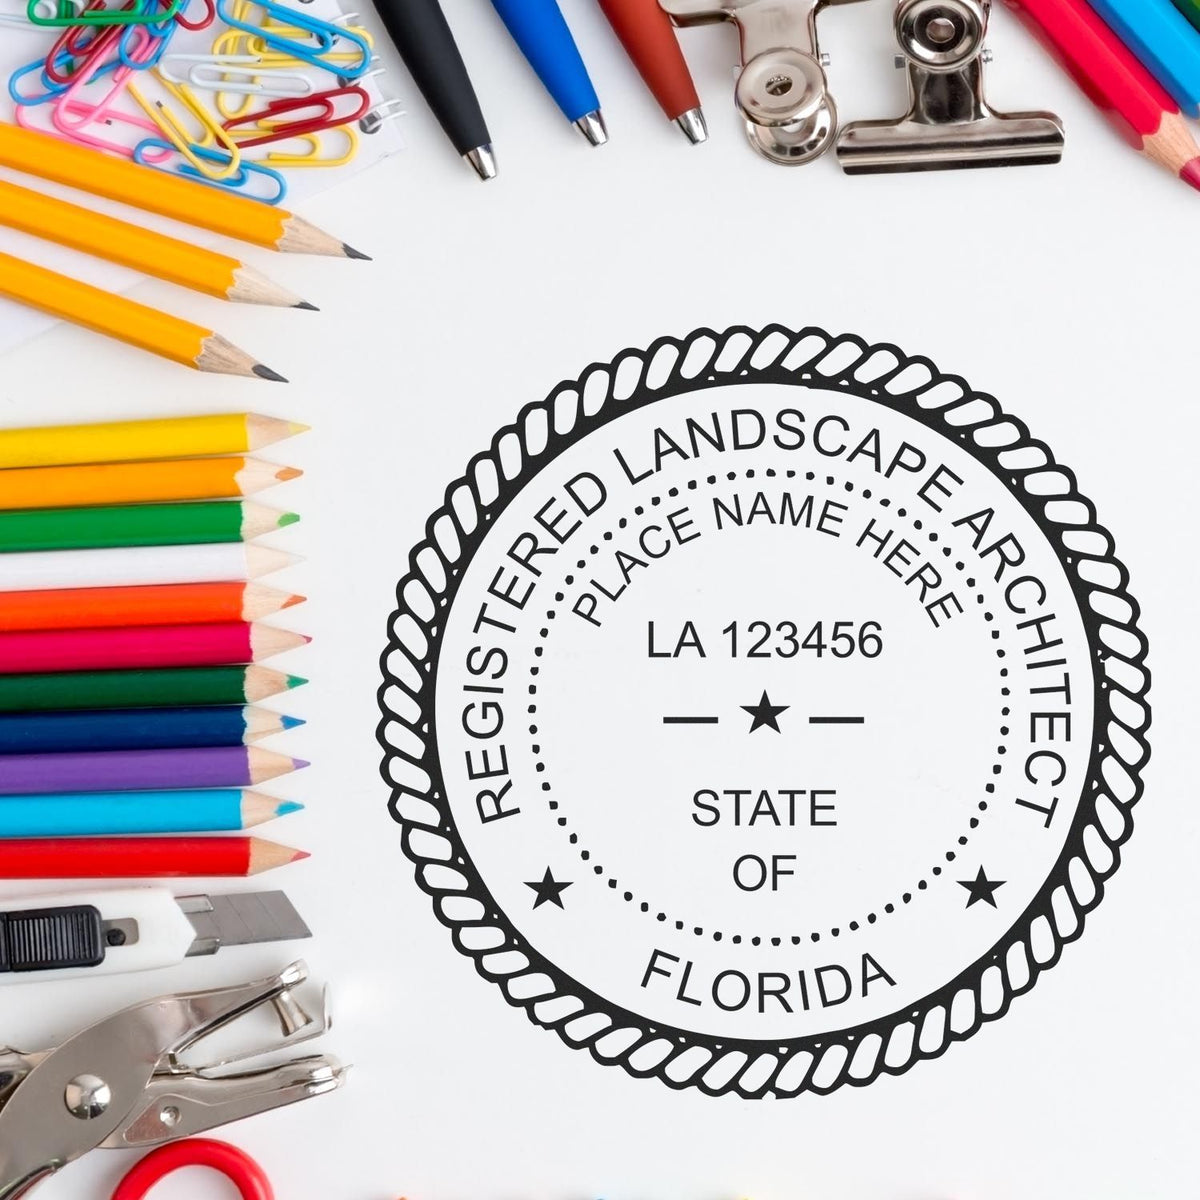 This paper is stamped with a sample imprint of the Florida Landscape Architectural Seal Stamp, signifying its quality and reliability.